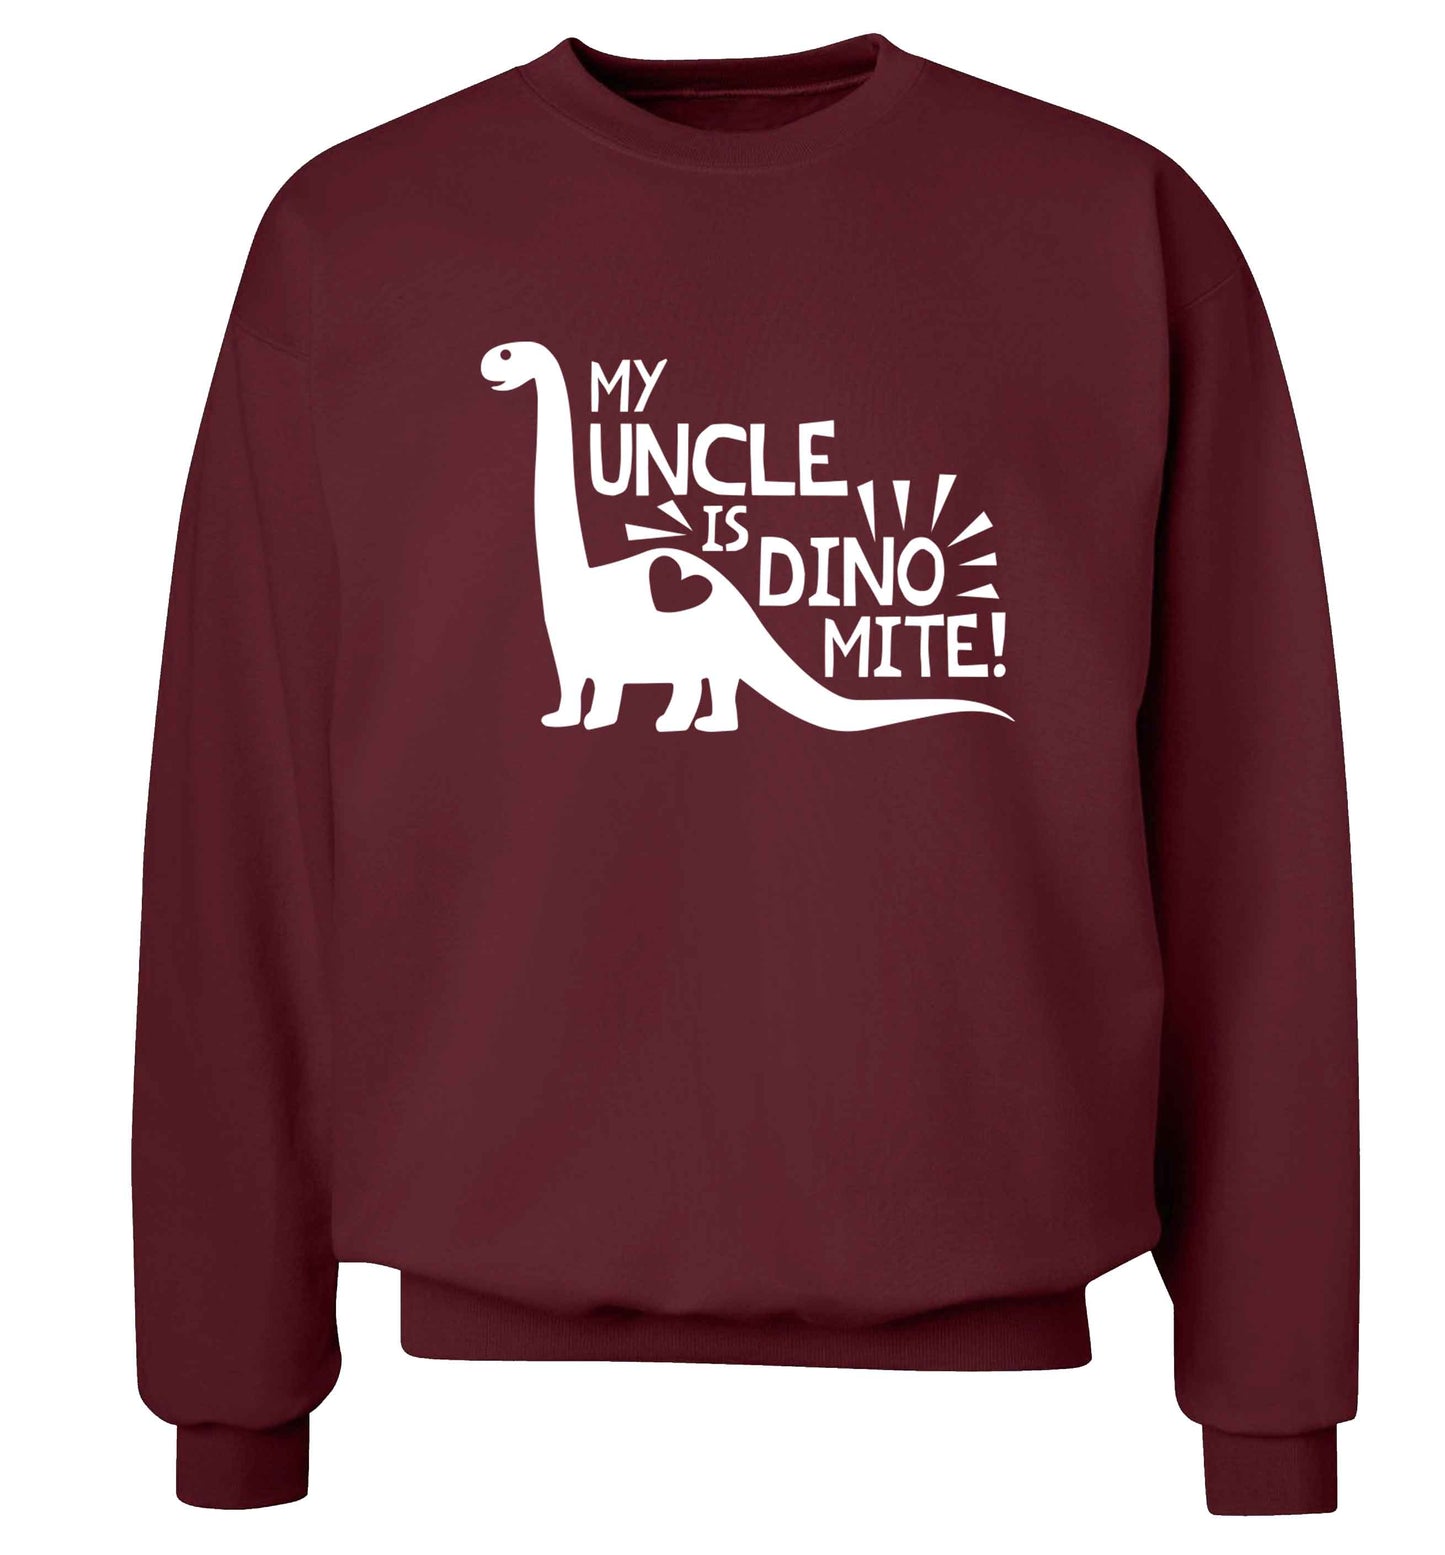 My uncle is dinomite! Adult's unisex maroon Sweater 2XL